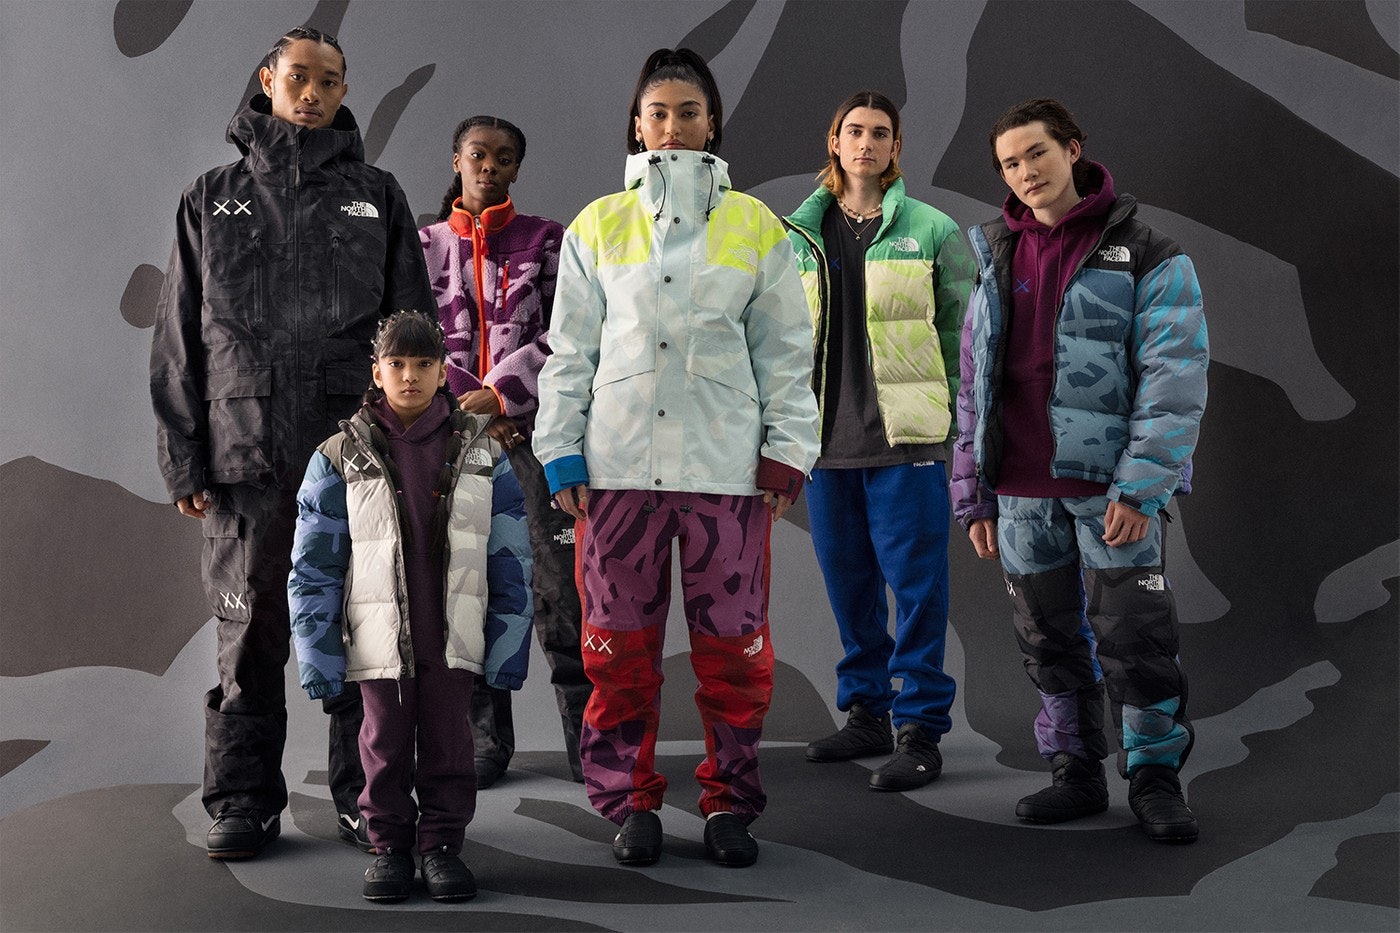 The North Face's Kaws collection is corny fun for the whole family